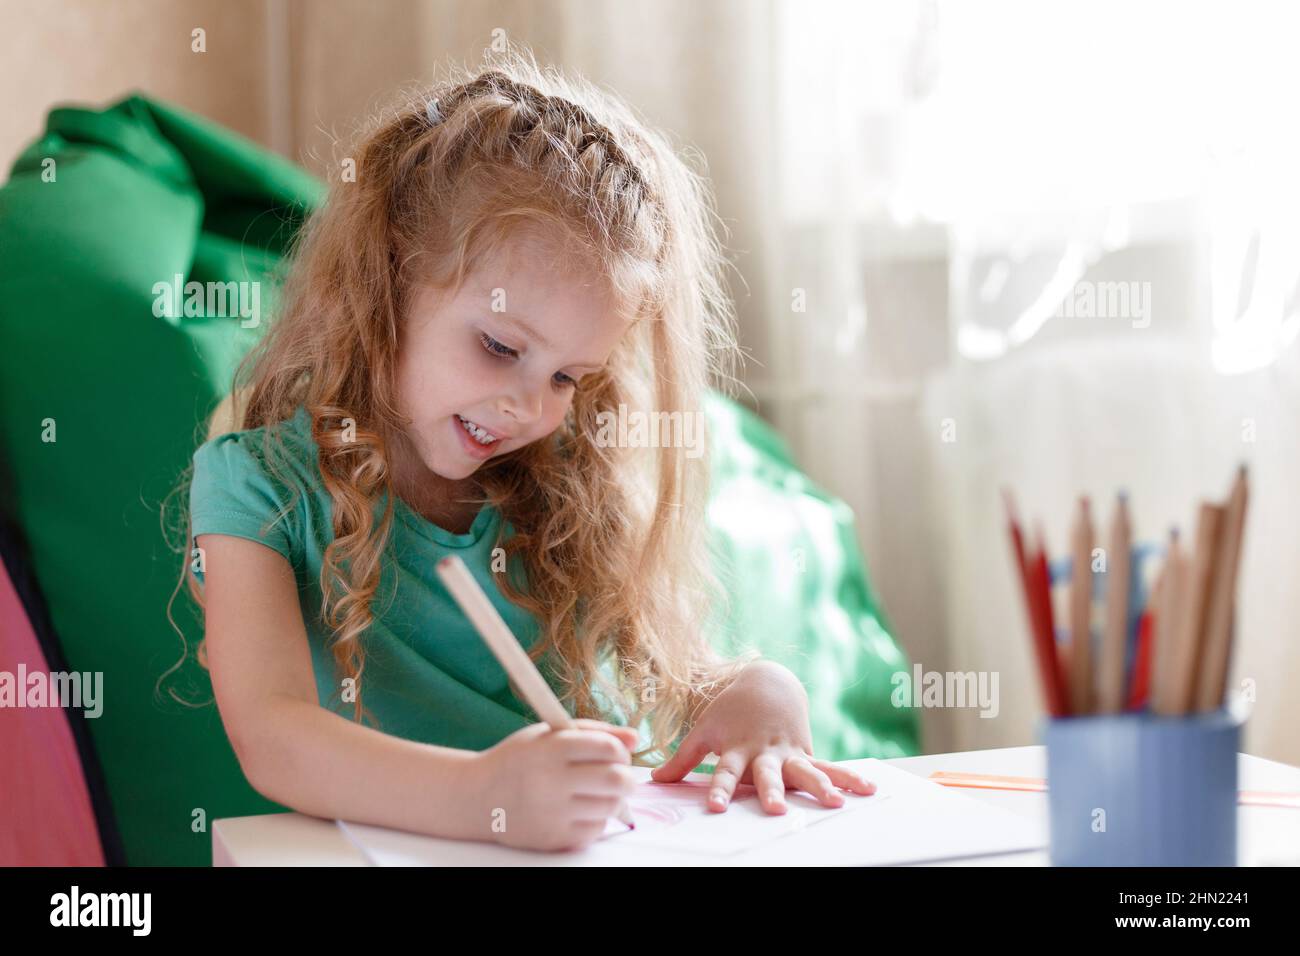 Little girl child kid in children's room play draws with interest by pencils in nursery. 5 Years happy smiling preschool baby girl draws in room alone Stock Photo